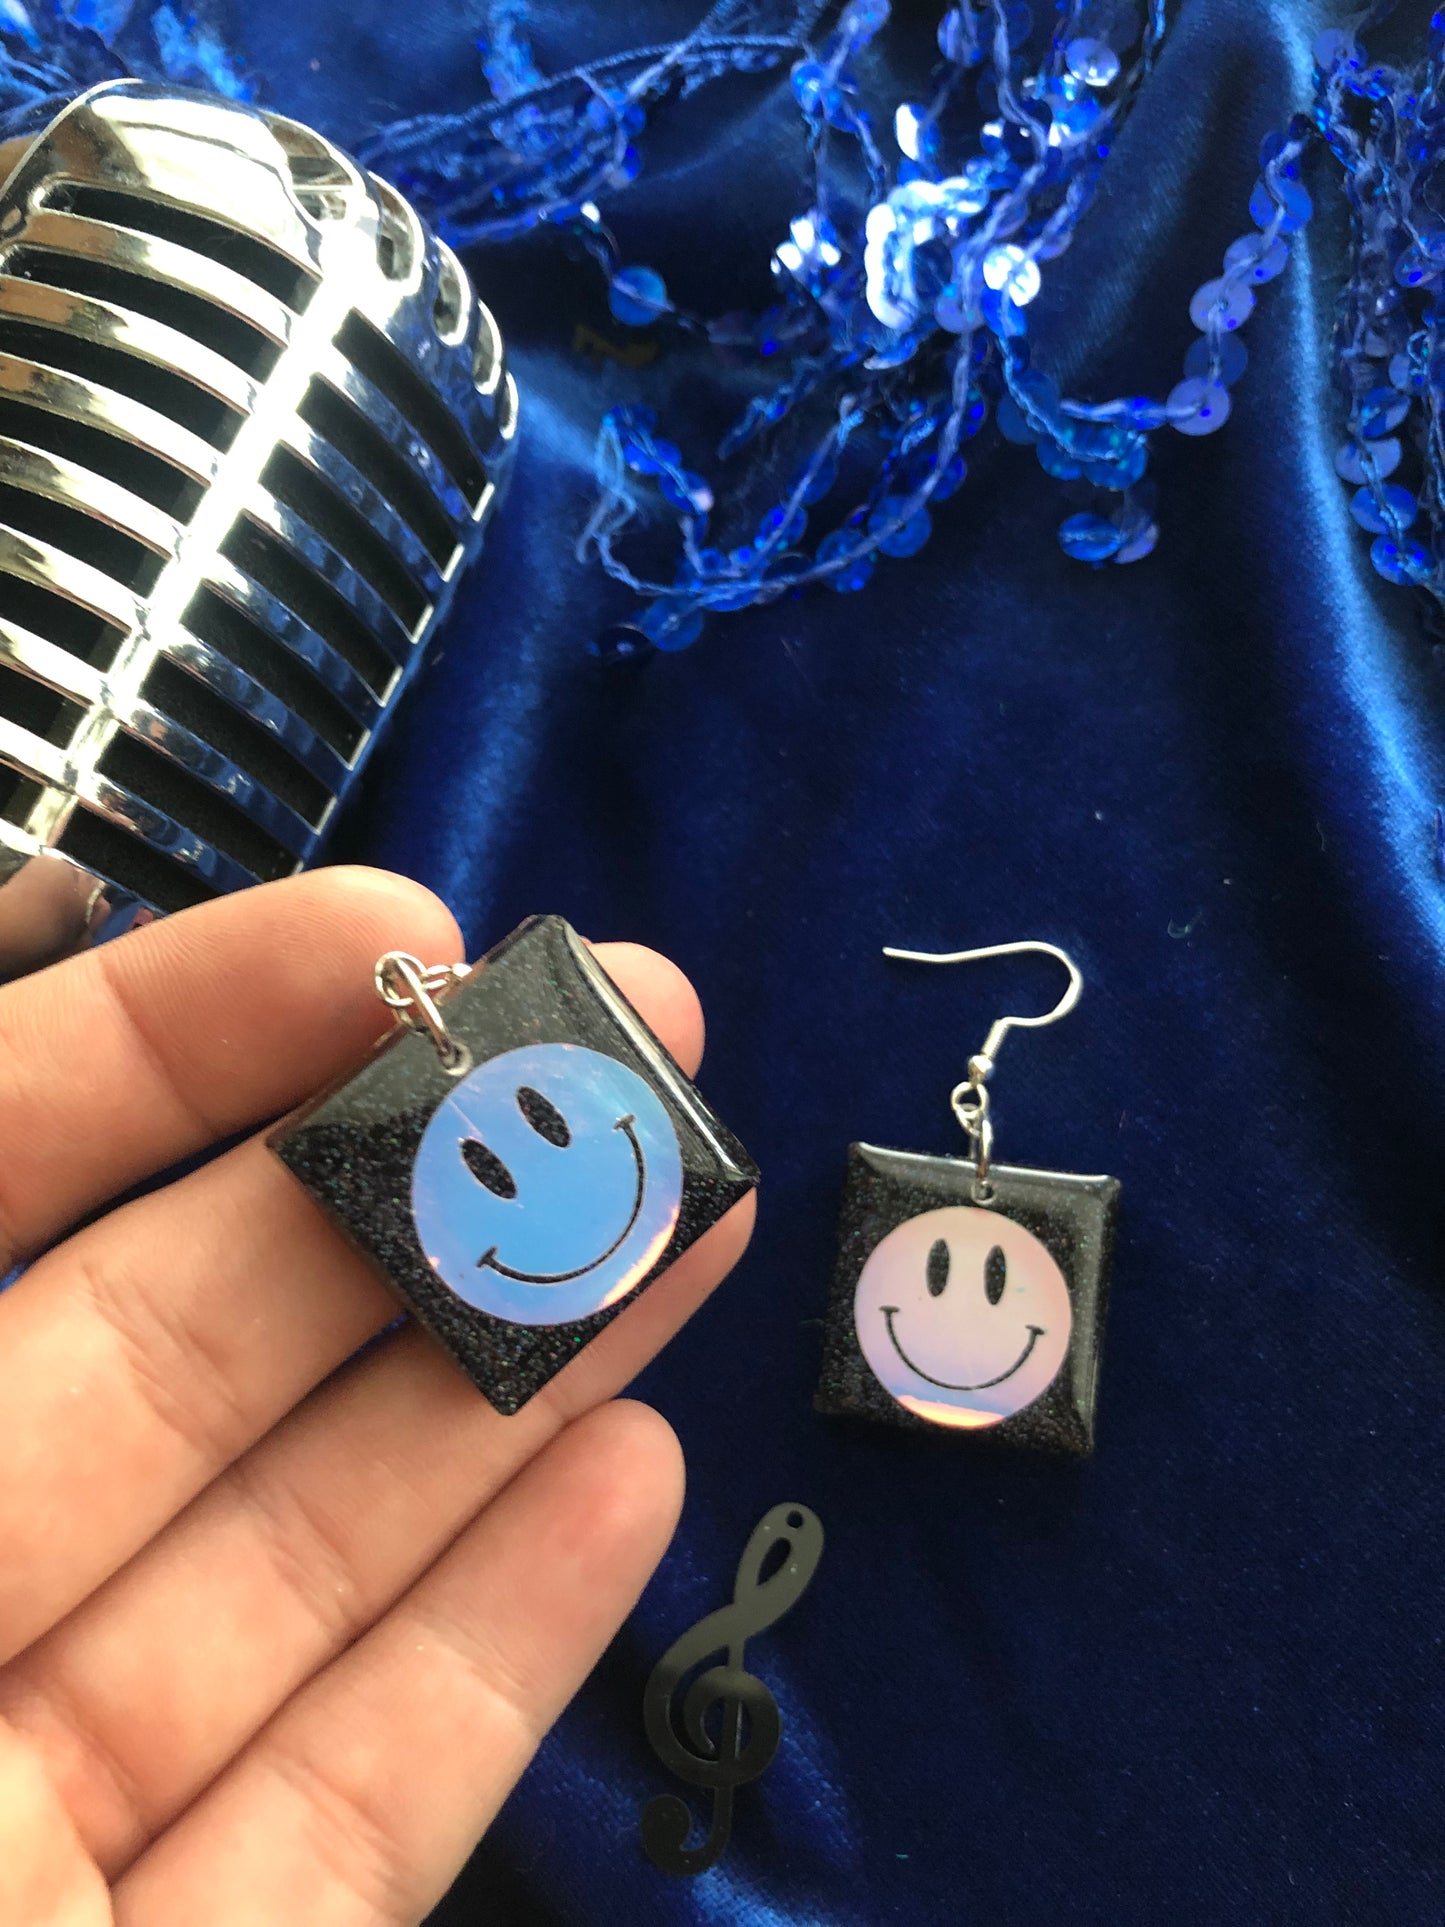 Iridescent Smiley Face Earrings